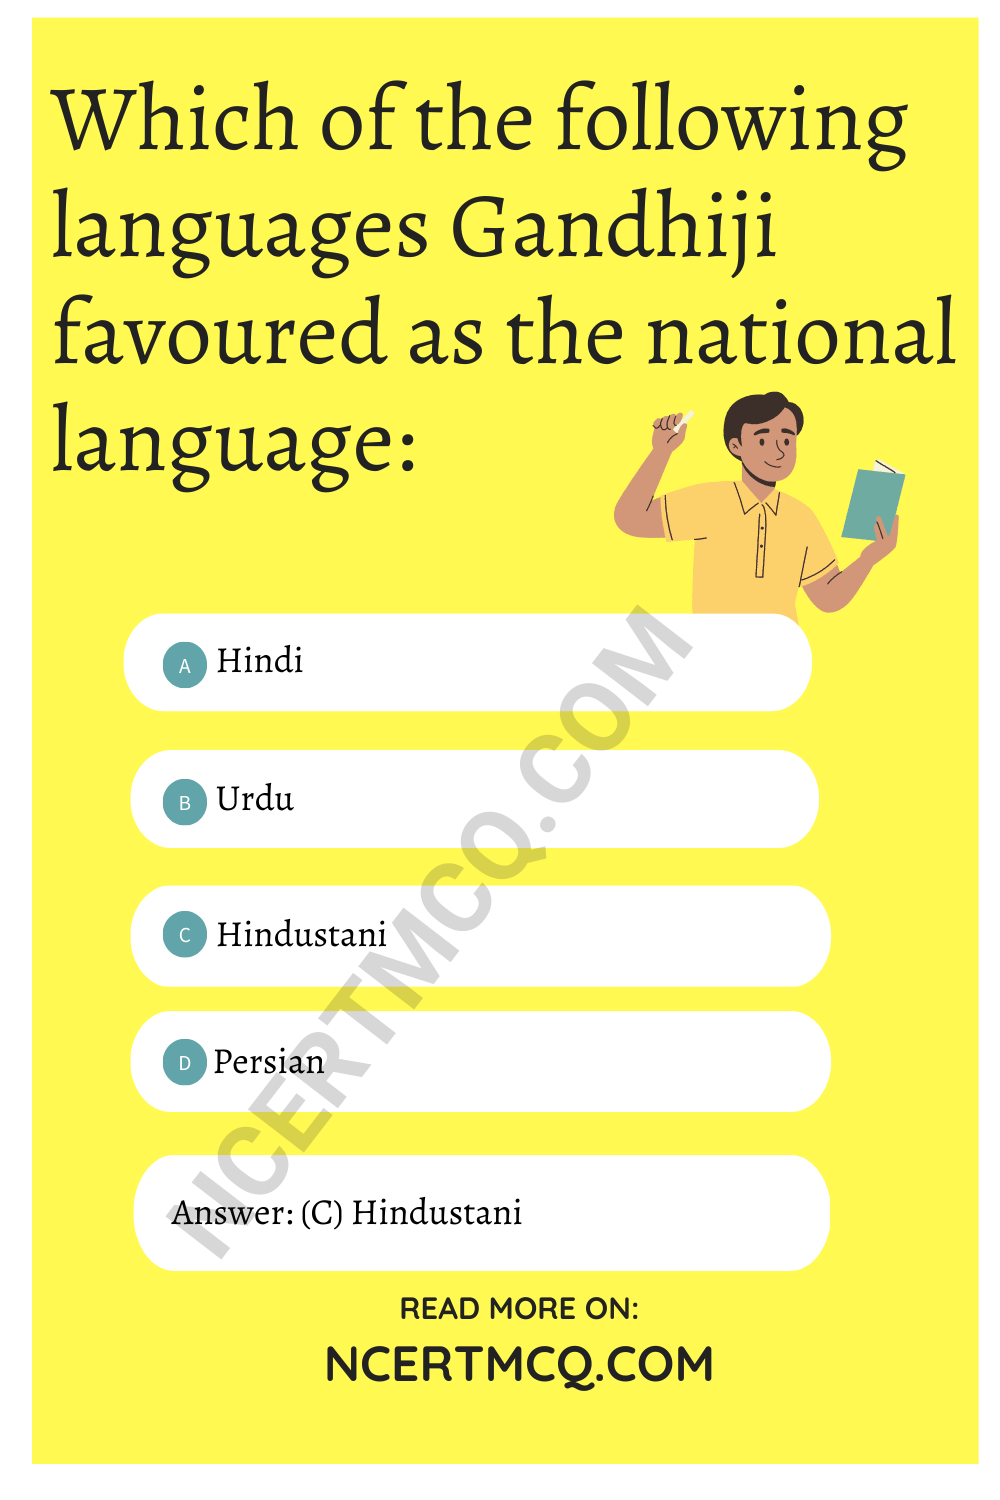 Which of the following languages Gandhiji favoured as the national language: